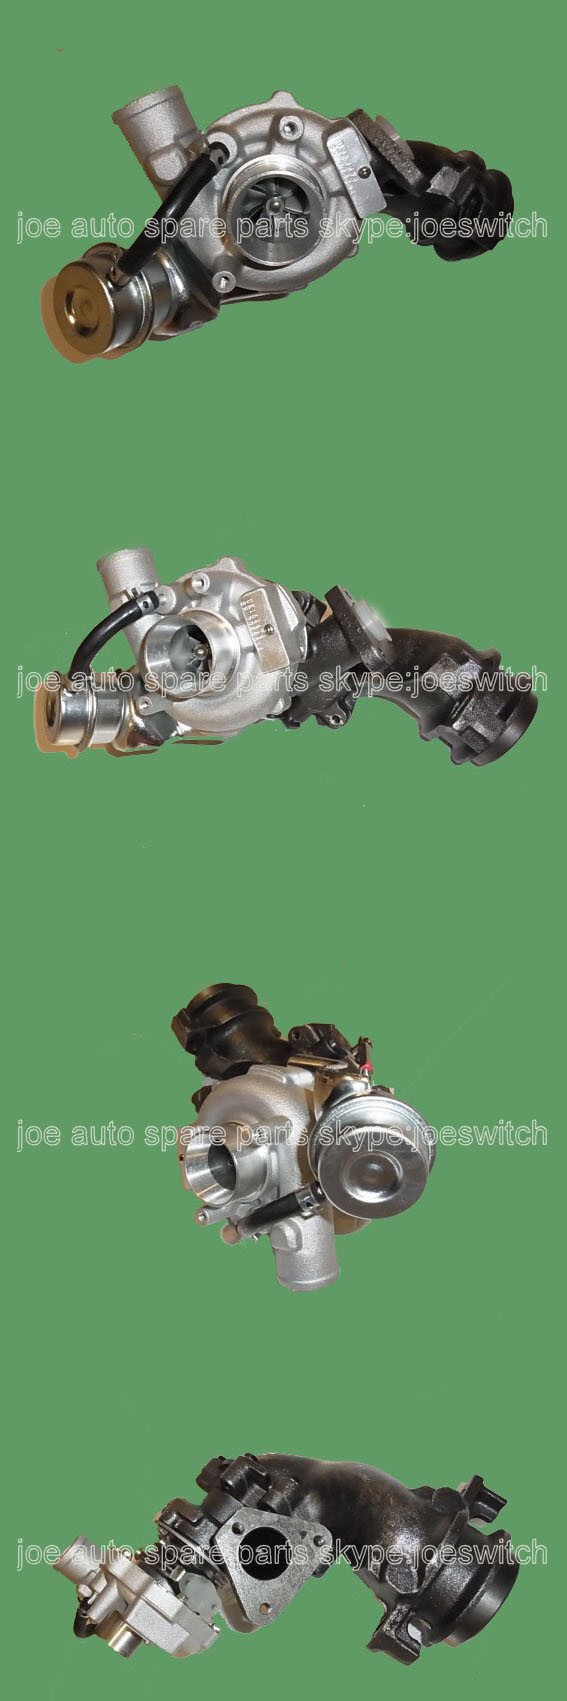 New GT1544S 454064 Turbo Turbine Turbocharger For VW T4 BUS Umwelt Transporter AAZ 75HP 1995-2003 1.9 4 TD with gaskets